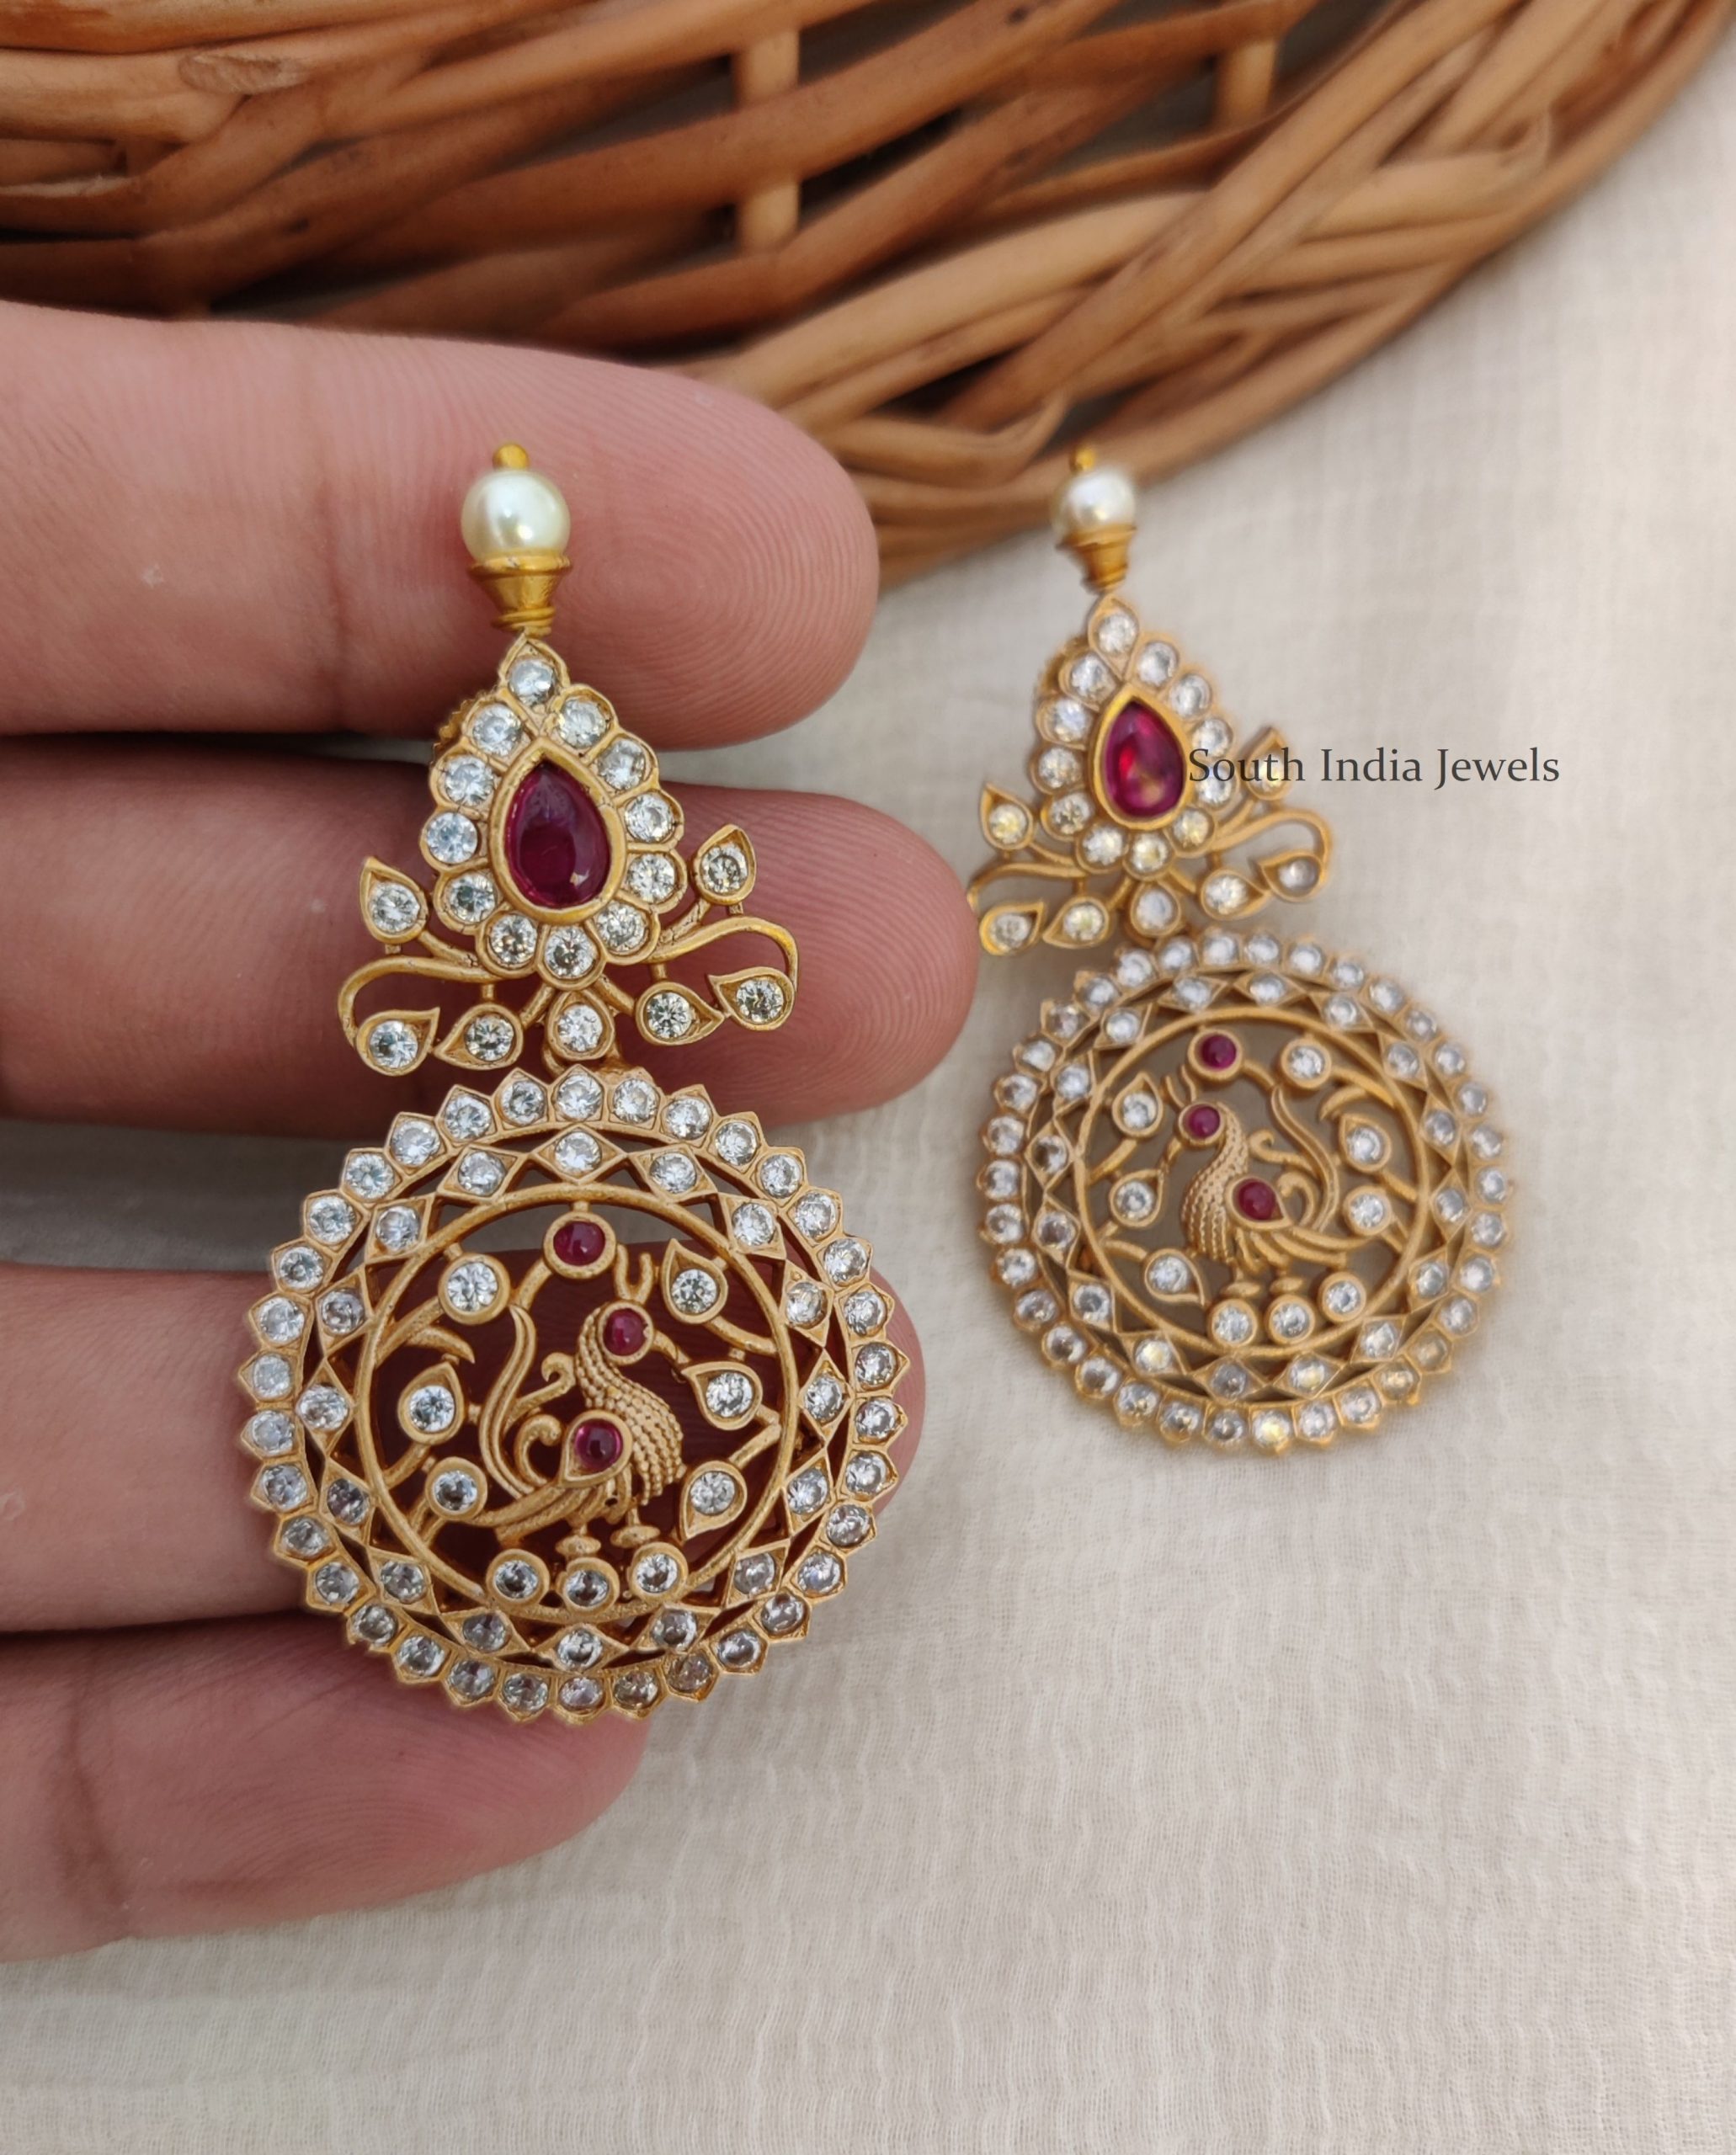 Peacock Design Earrings | AD Stone Earrings - South India Jewels